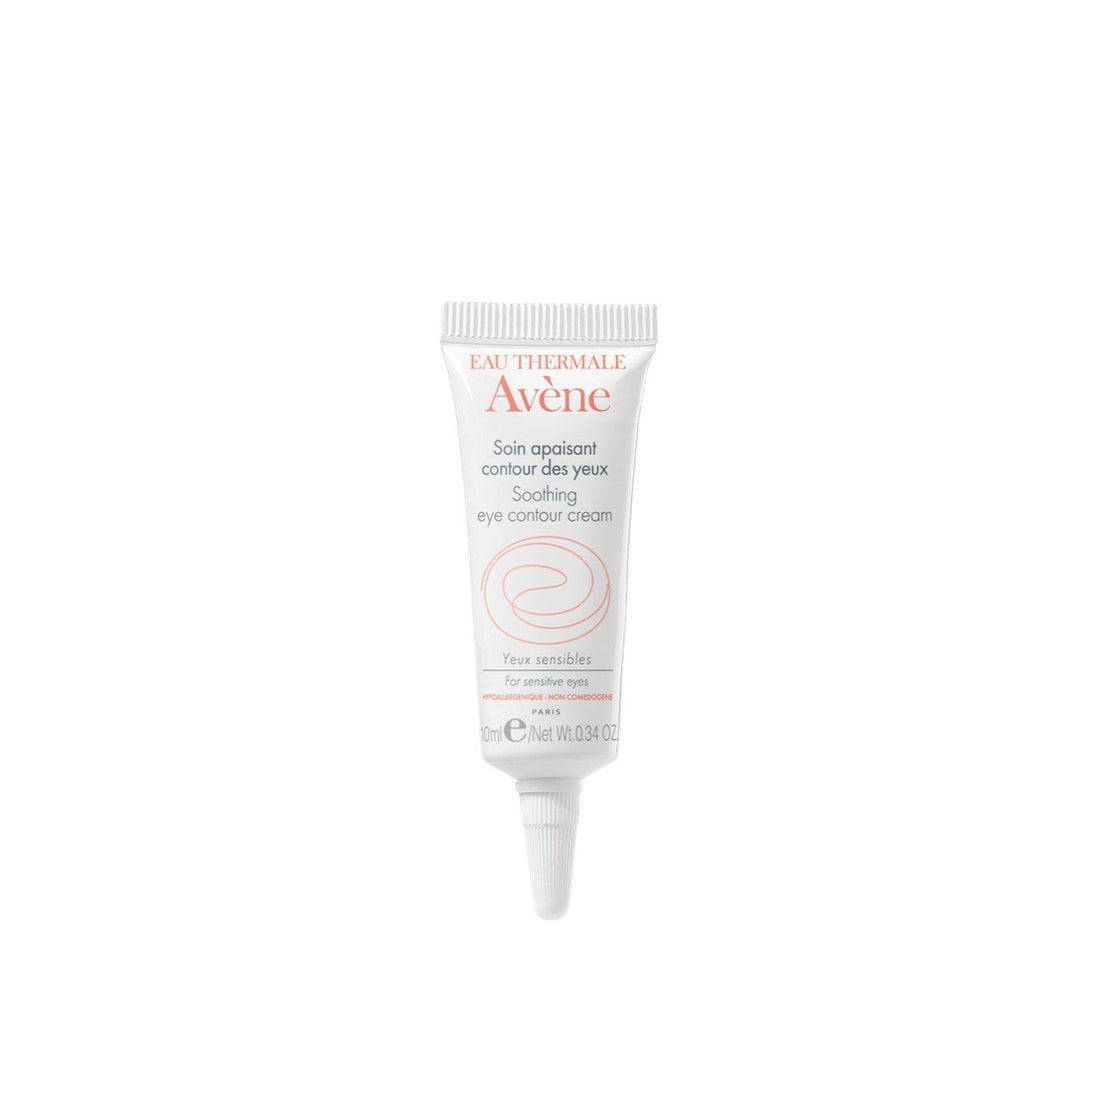 Avène Les Essentiels Eye Contour Emulsion Puffiness And Dark Circles 10ml